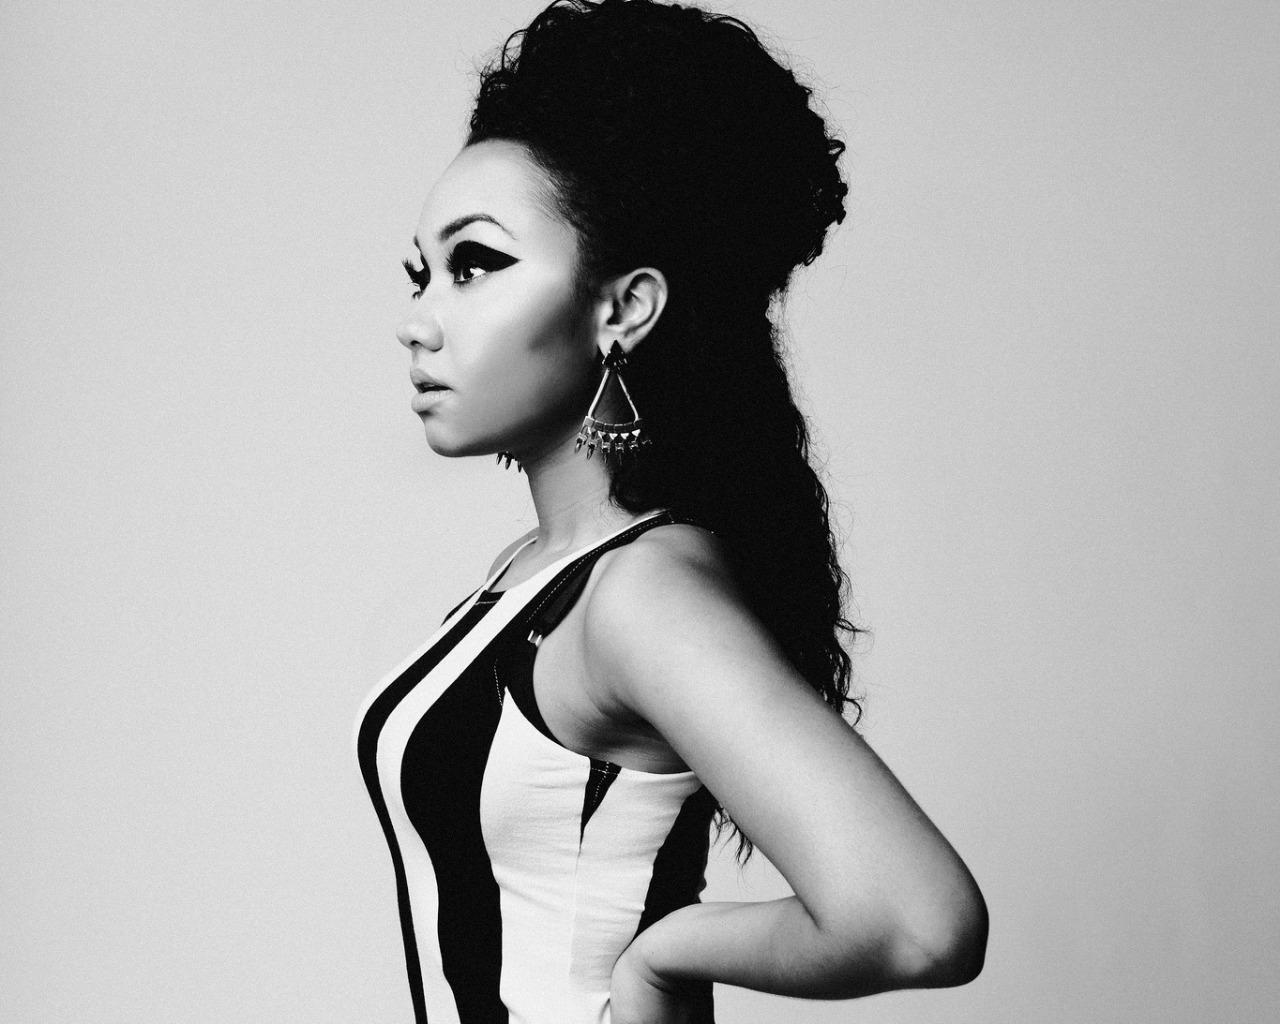 HAPPY BIRTHDAY LEIGH ANNE PINNOCK! <3 
OMG I\M SO PROUDER OF YOU BAE! I LOVE YOU SO MUCH! <3 